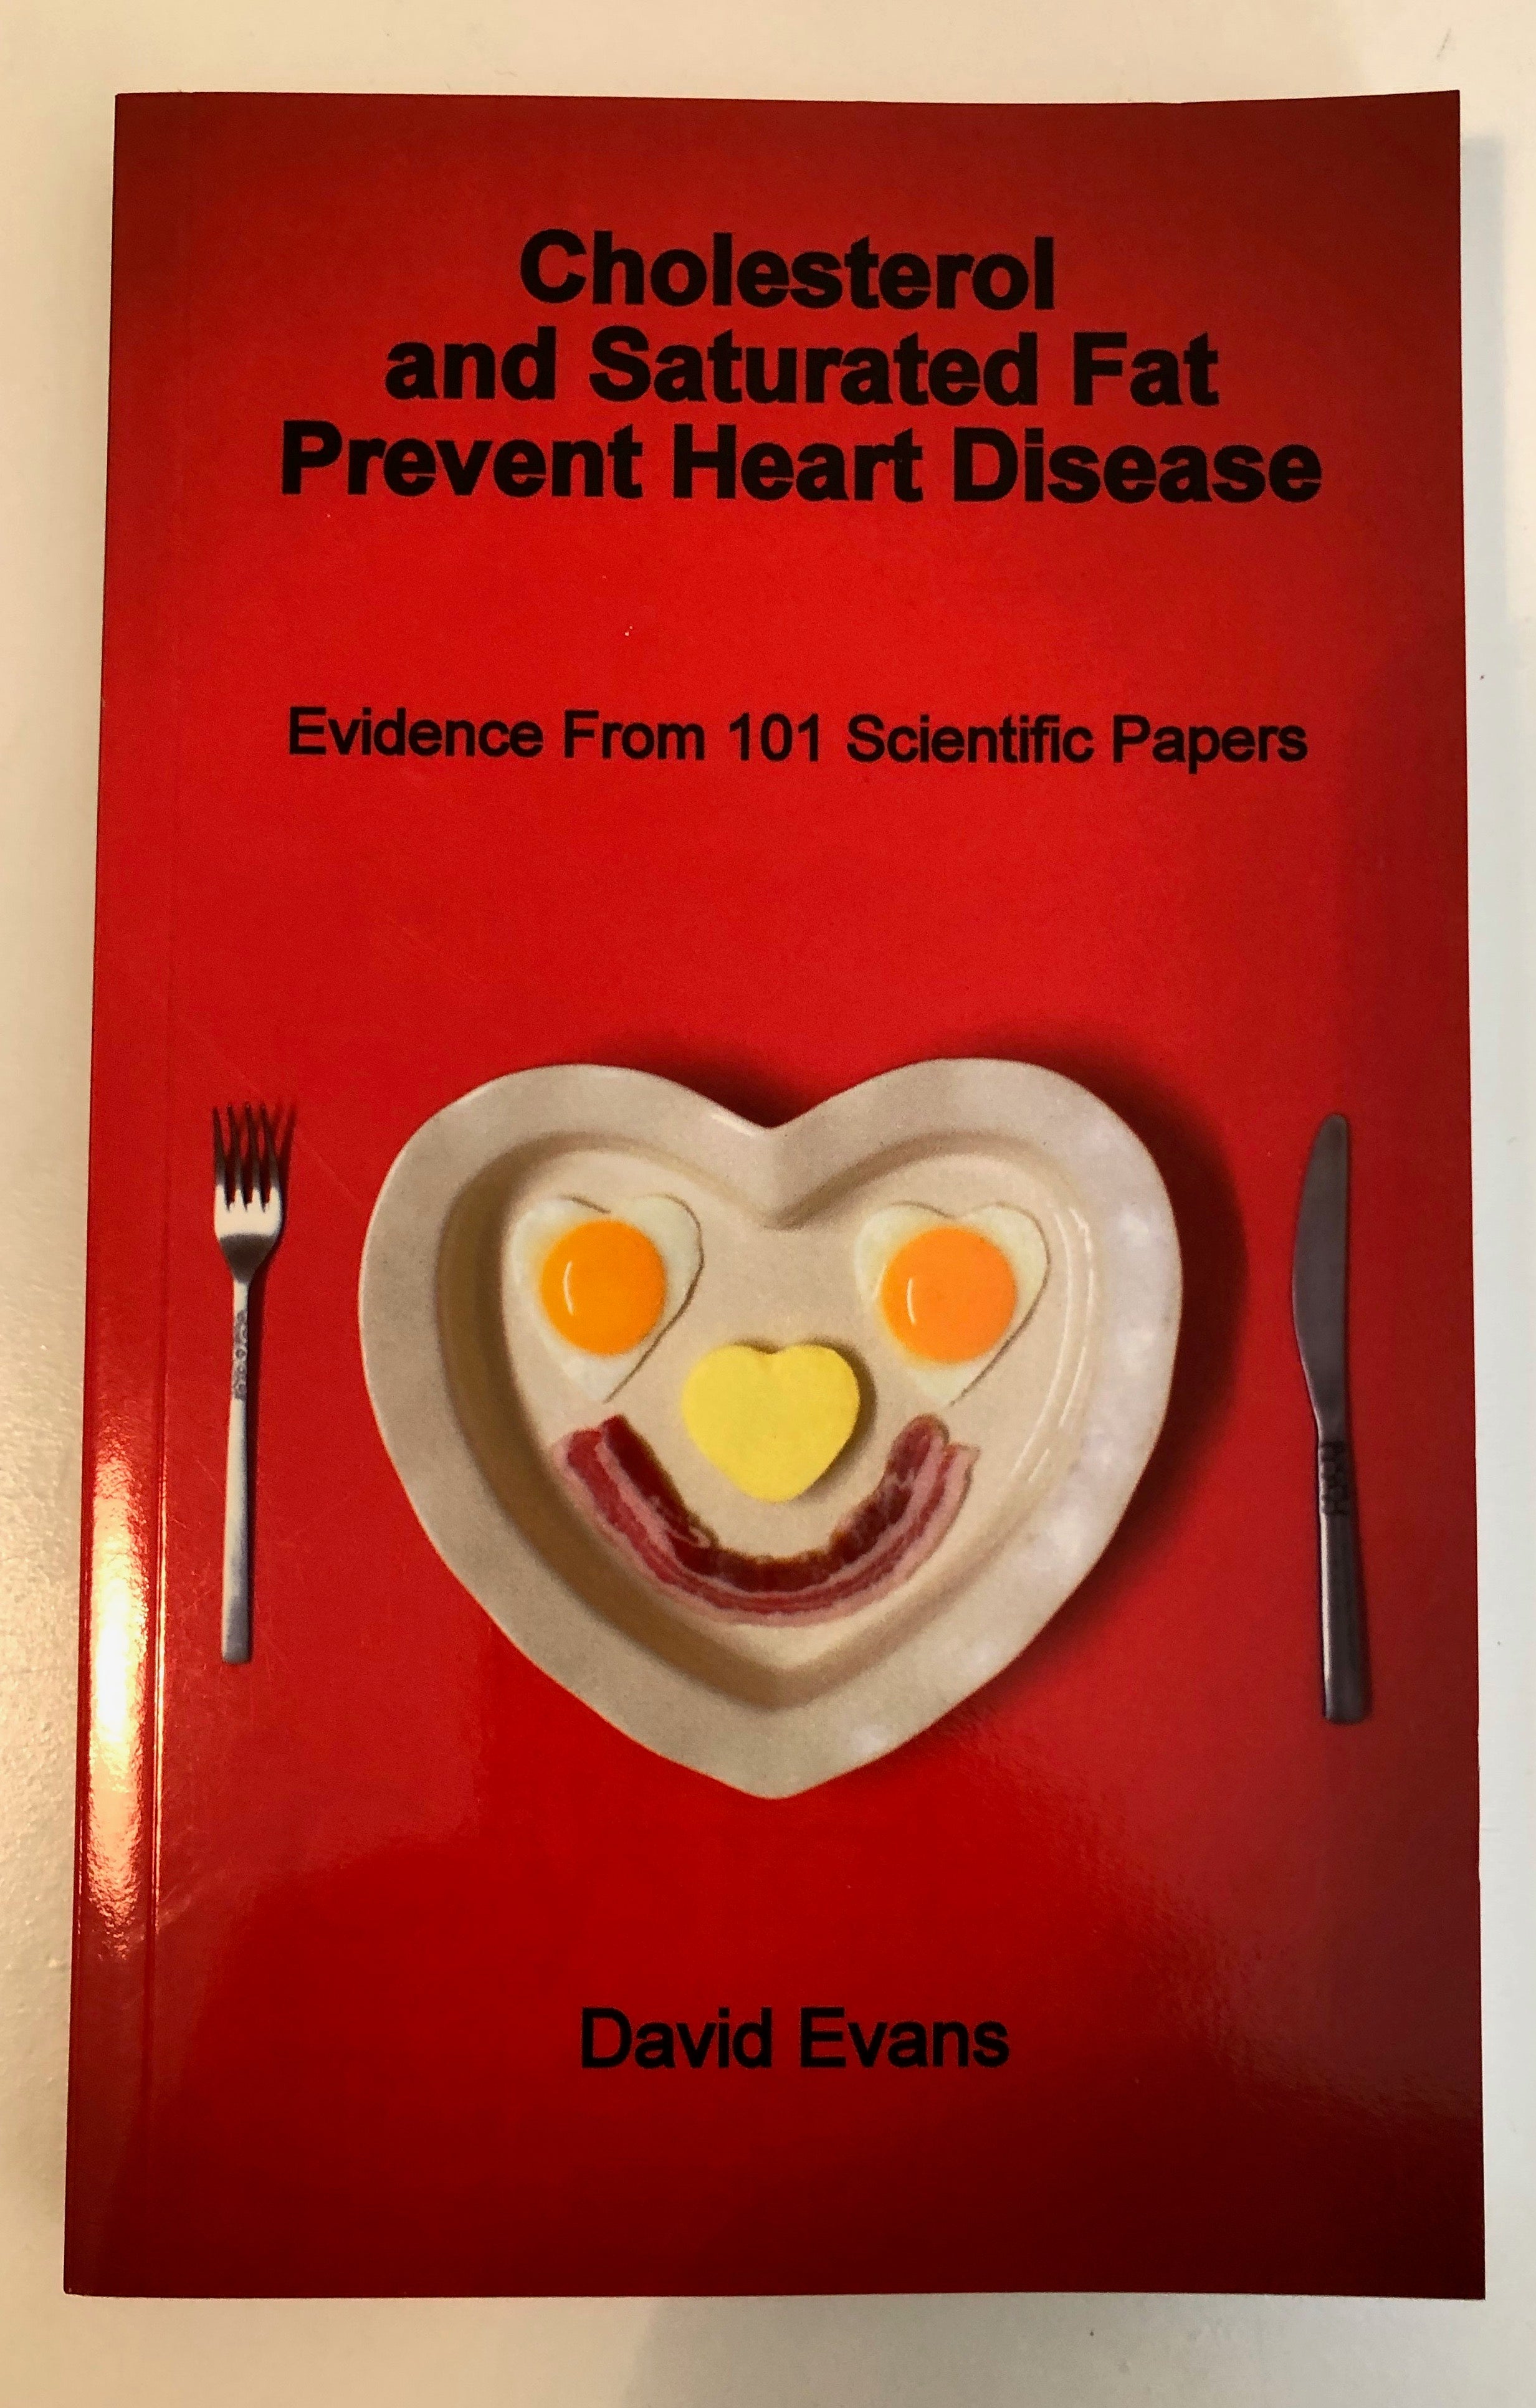 Cholesterol and Saturated Fat Prevent Heart Disease - Evidence from 101 Scientific Papers - David Evans